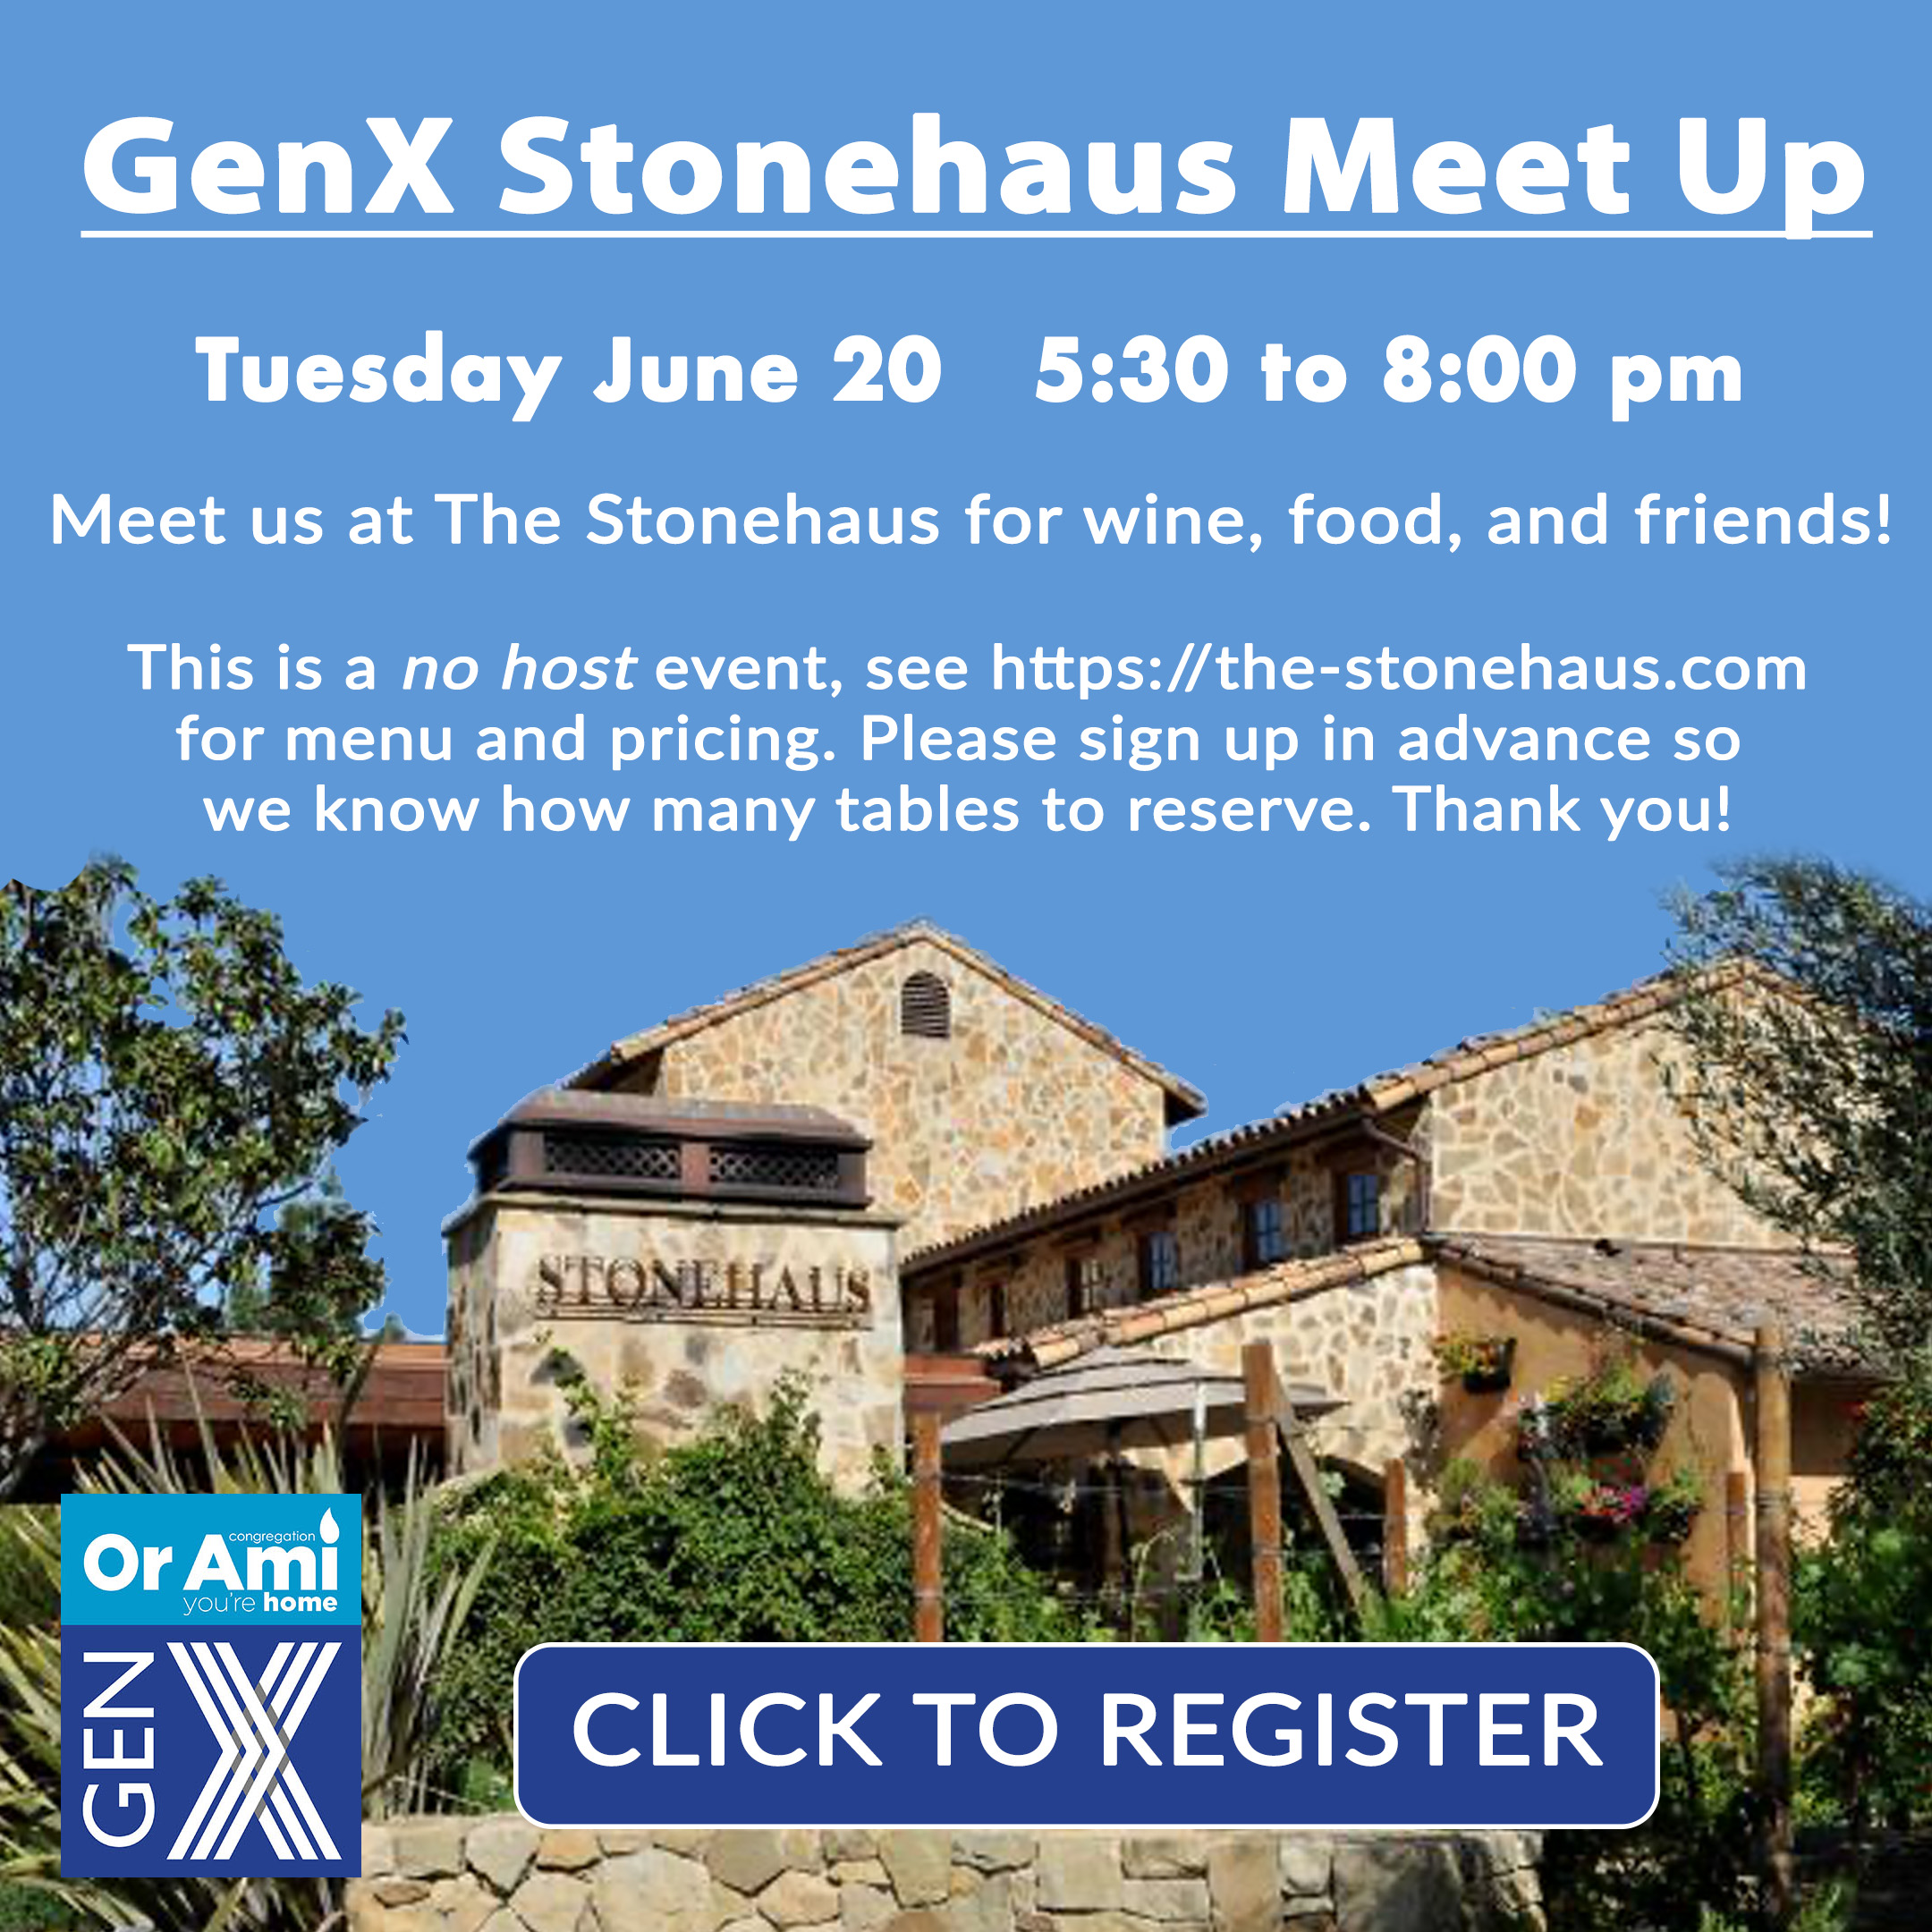 genx stonehaus with CLICK